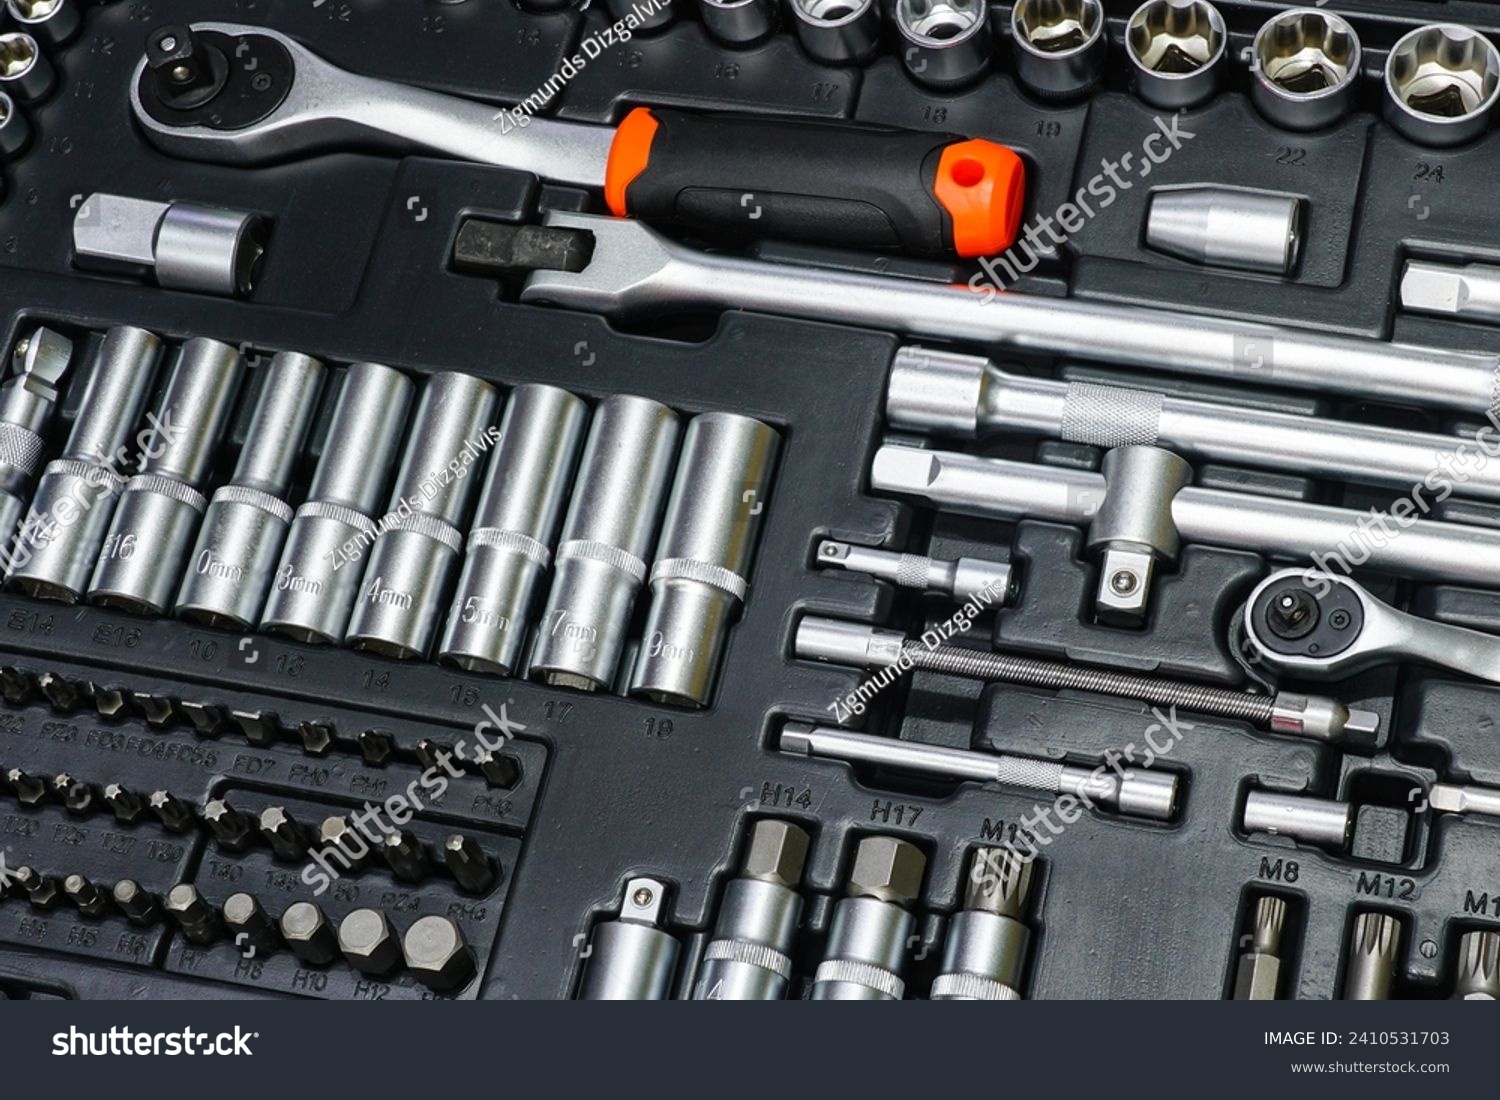 Tool box, tool kit closeup with set of hex, torx and screwdriver bits and ratchet wrench sockets #2410531703